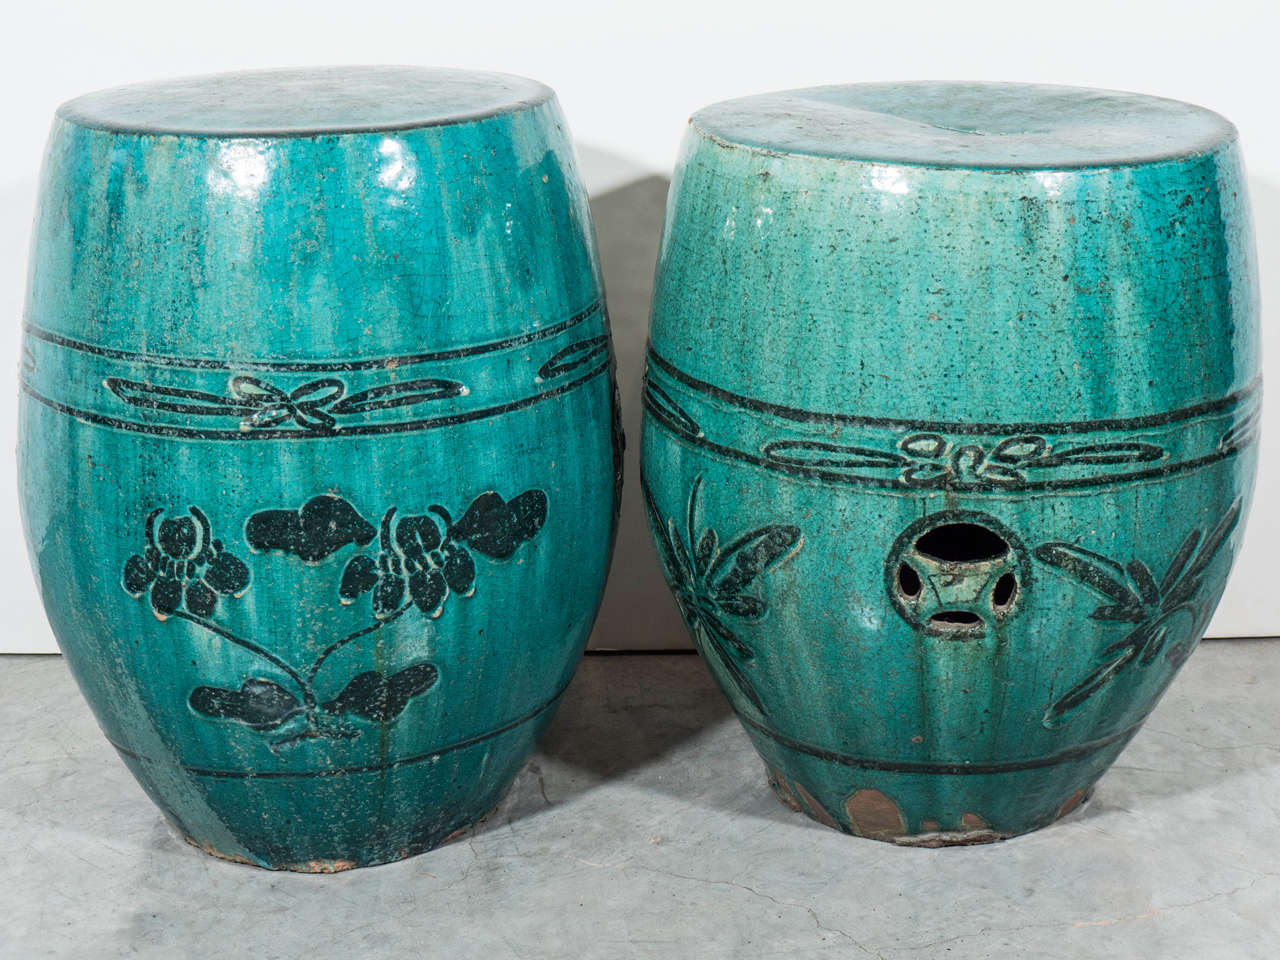 Two beautifully decorated and glazed antique ceramic garden stools from China, Hunan Province, c. 1900.  Sold Individually.
CR497